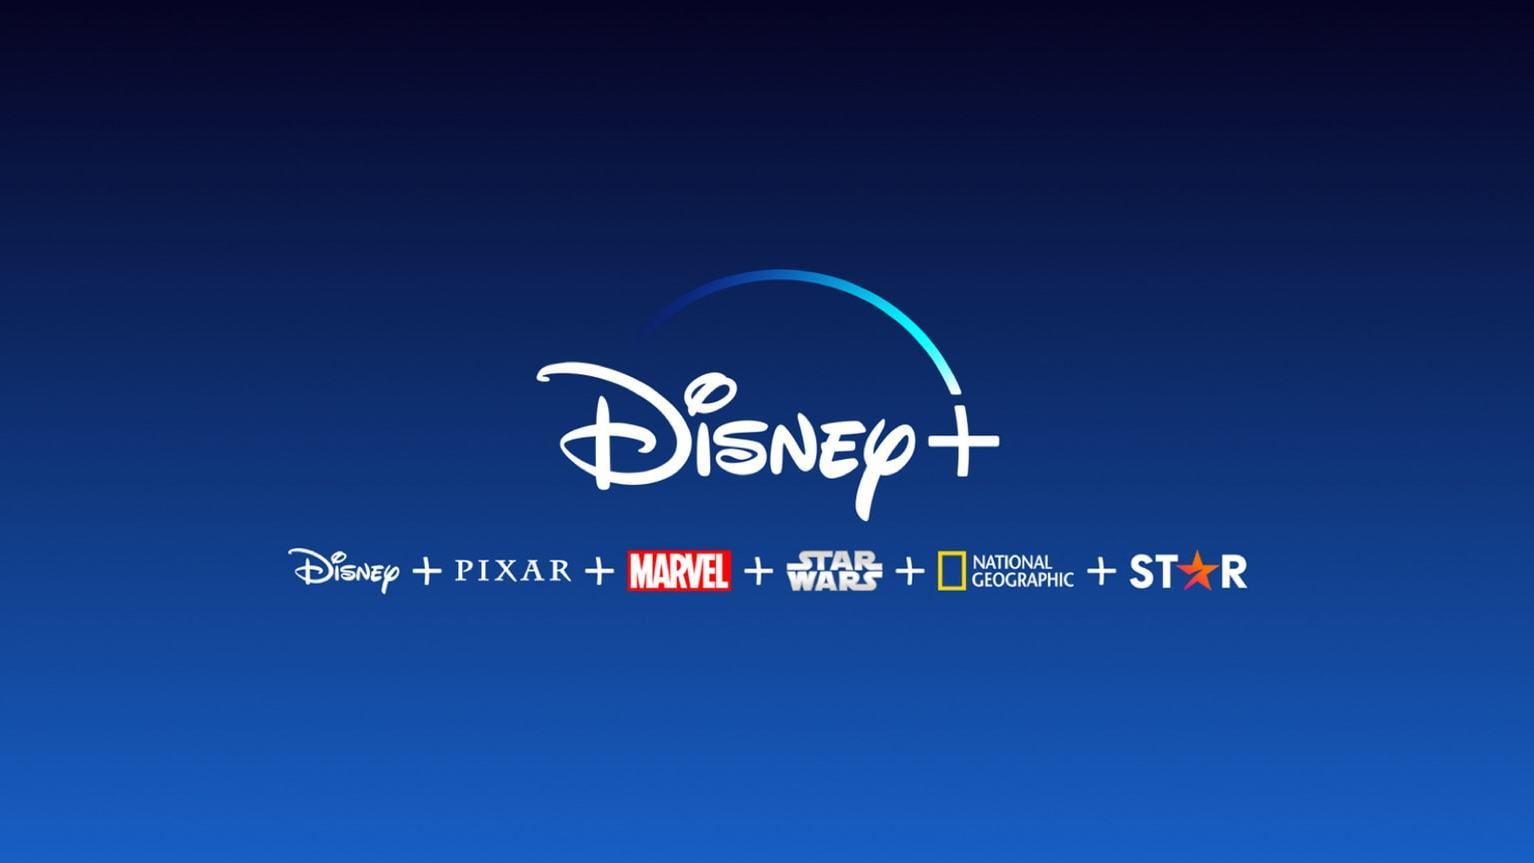 DISNEY+ CONFIRMS 42 COUNTRIES TO LAUNCH IN EUROPE, MIDDLE EAST AND AFRICA THIS SUMMER